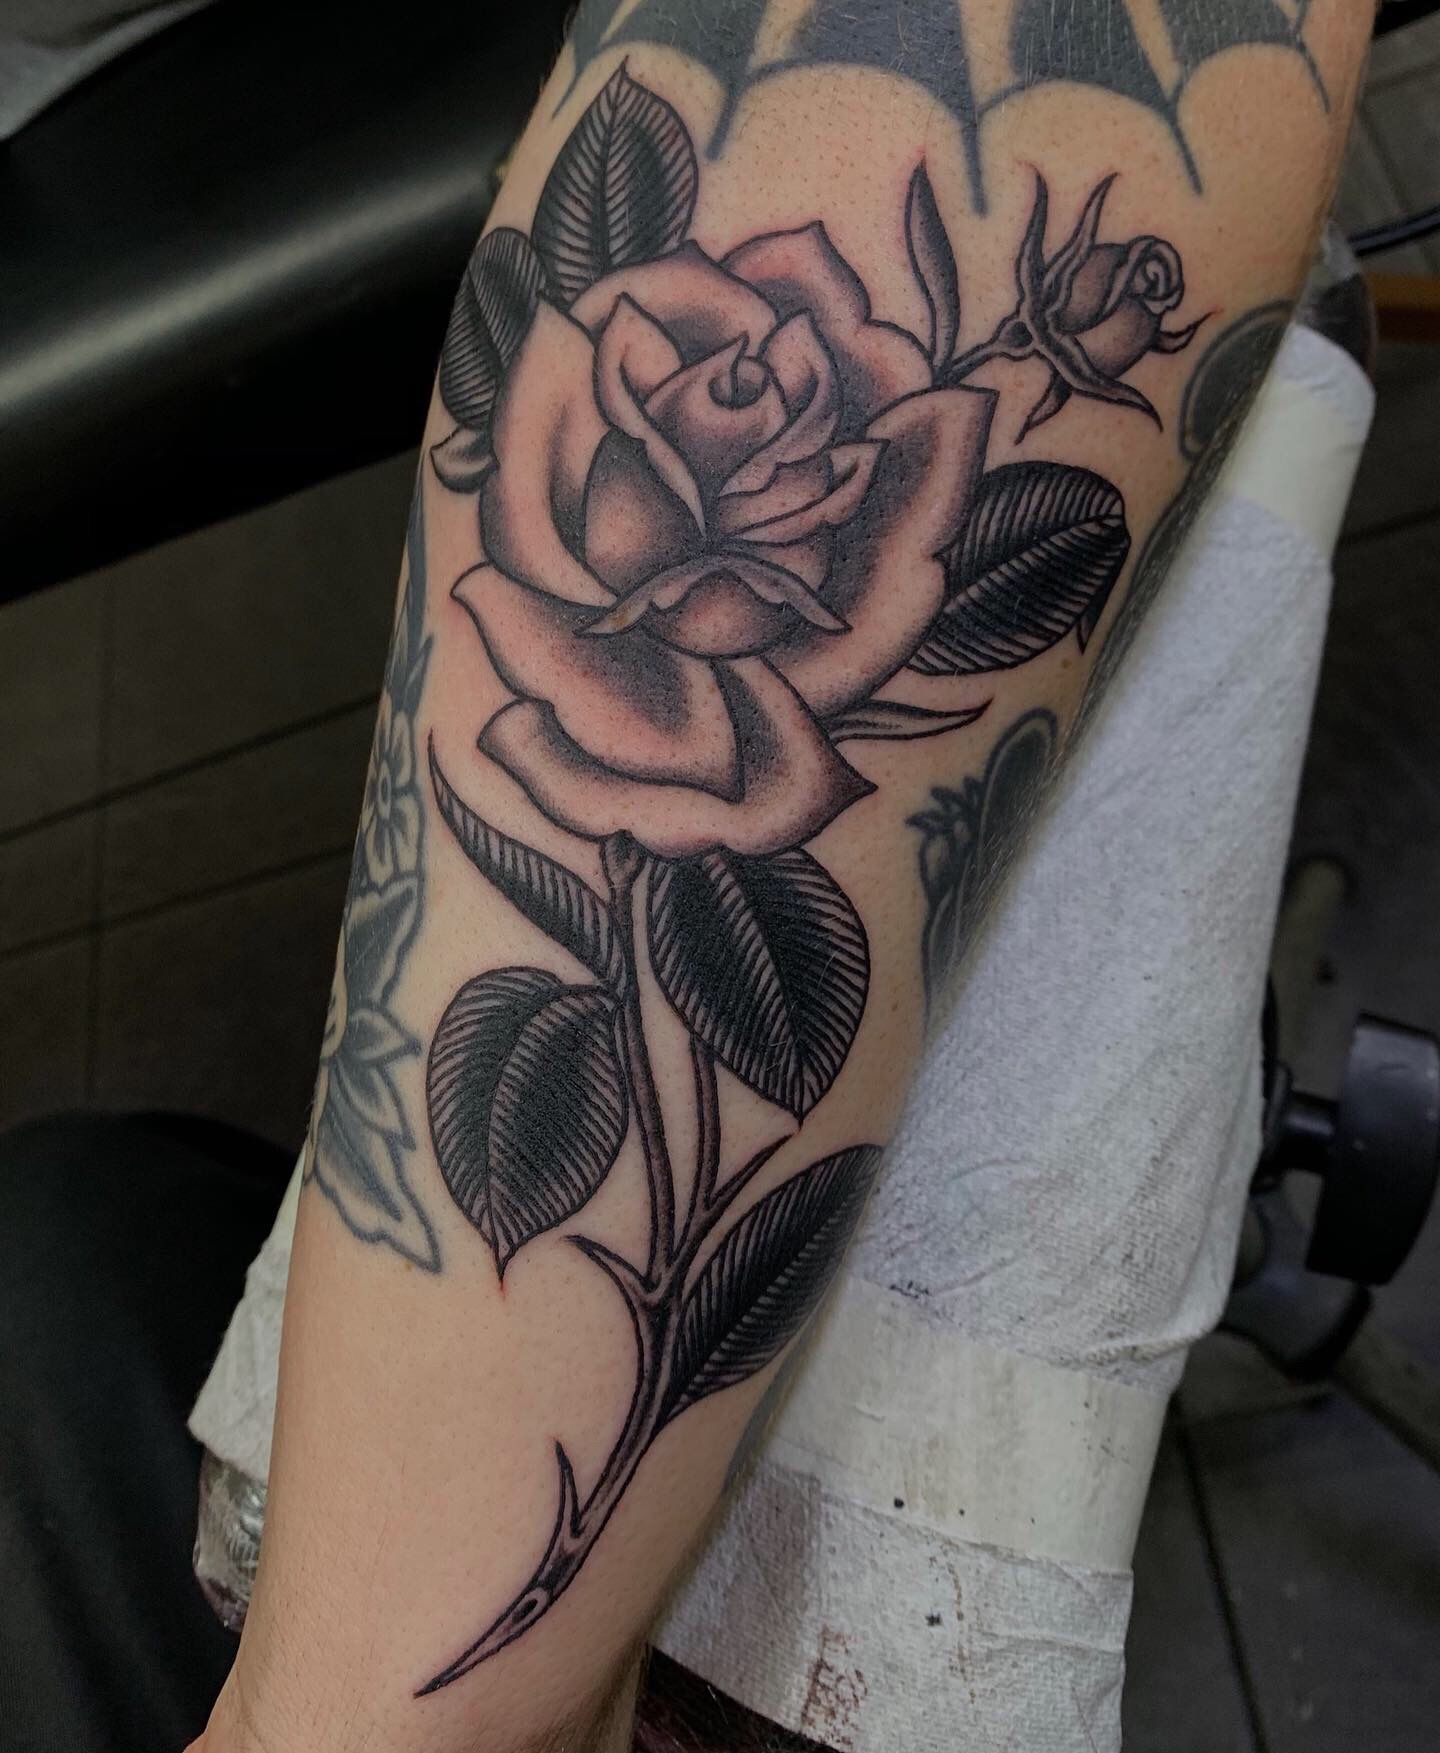 Tattoo uploaded by Jesse  Color rose rework and coverup  Tattoodo